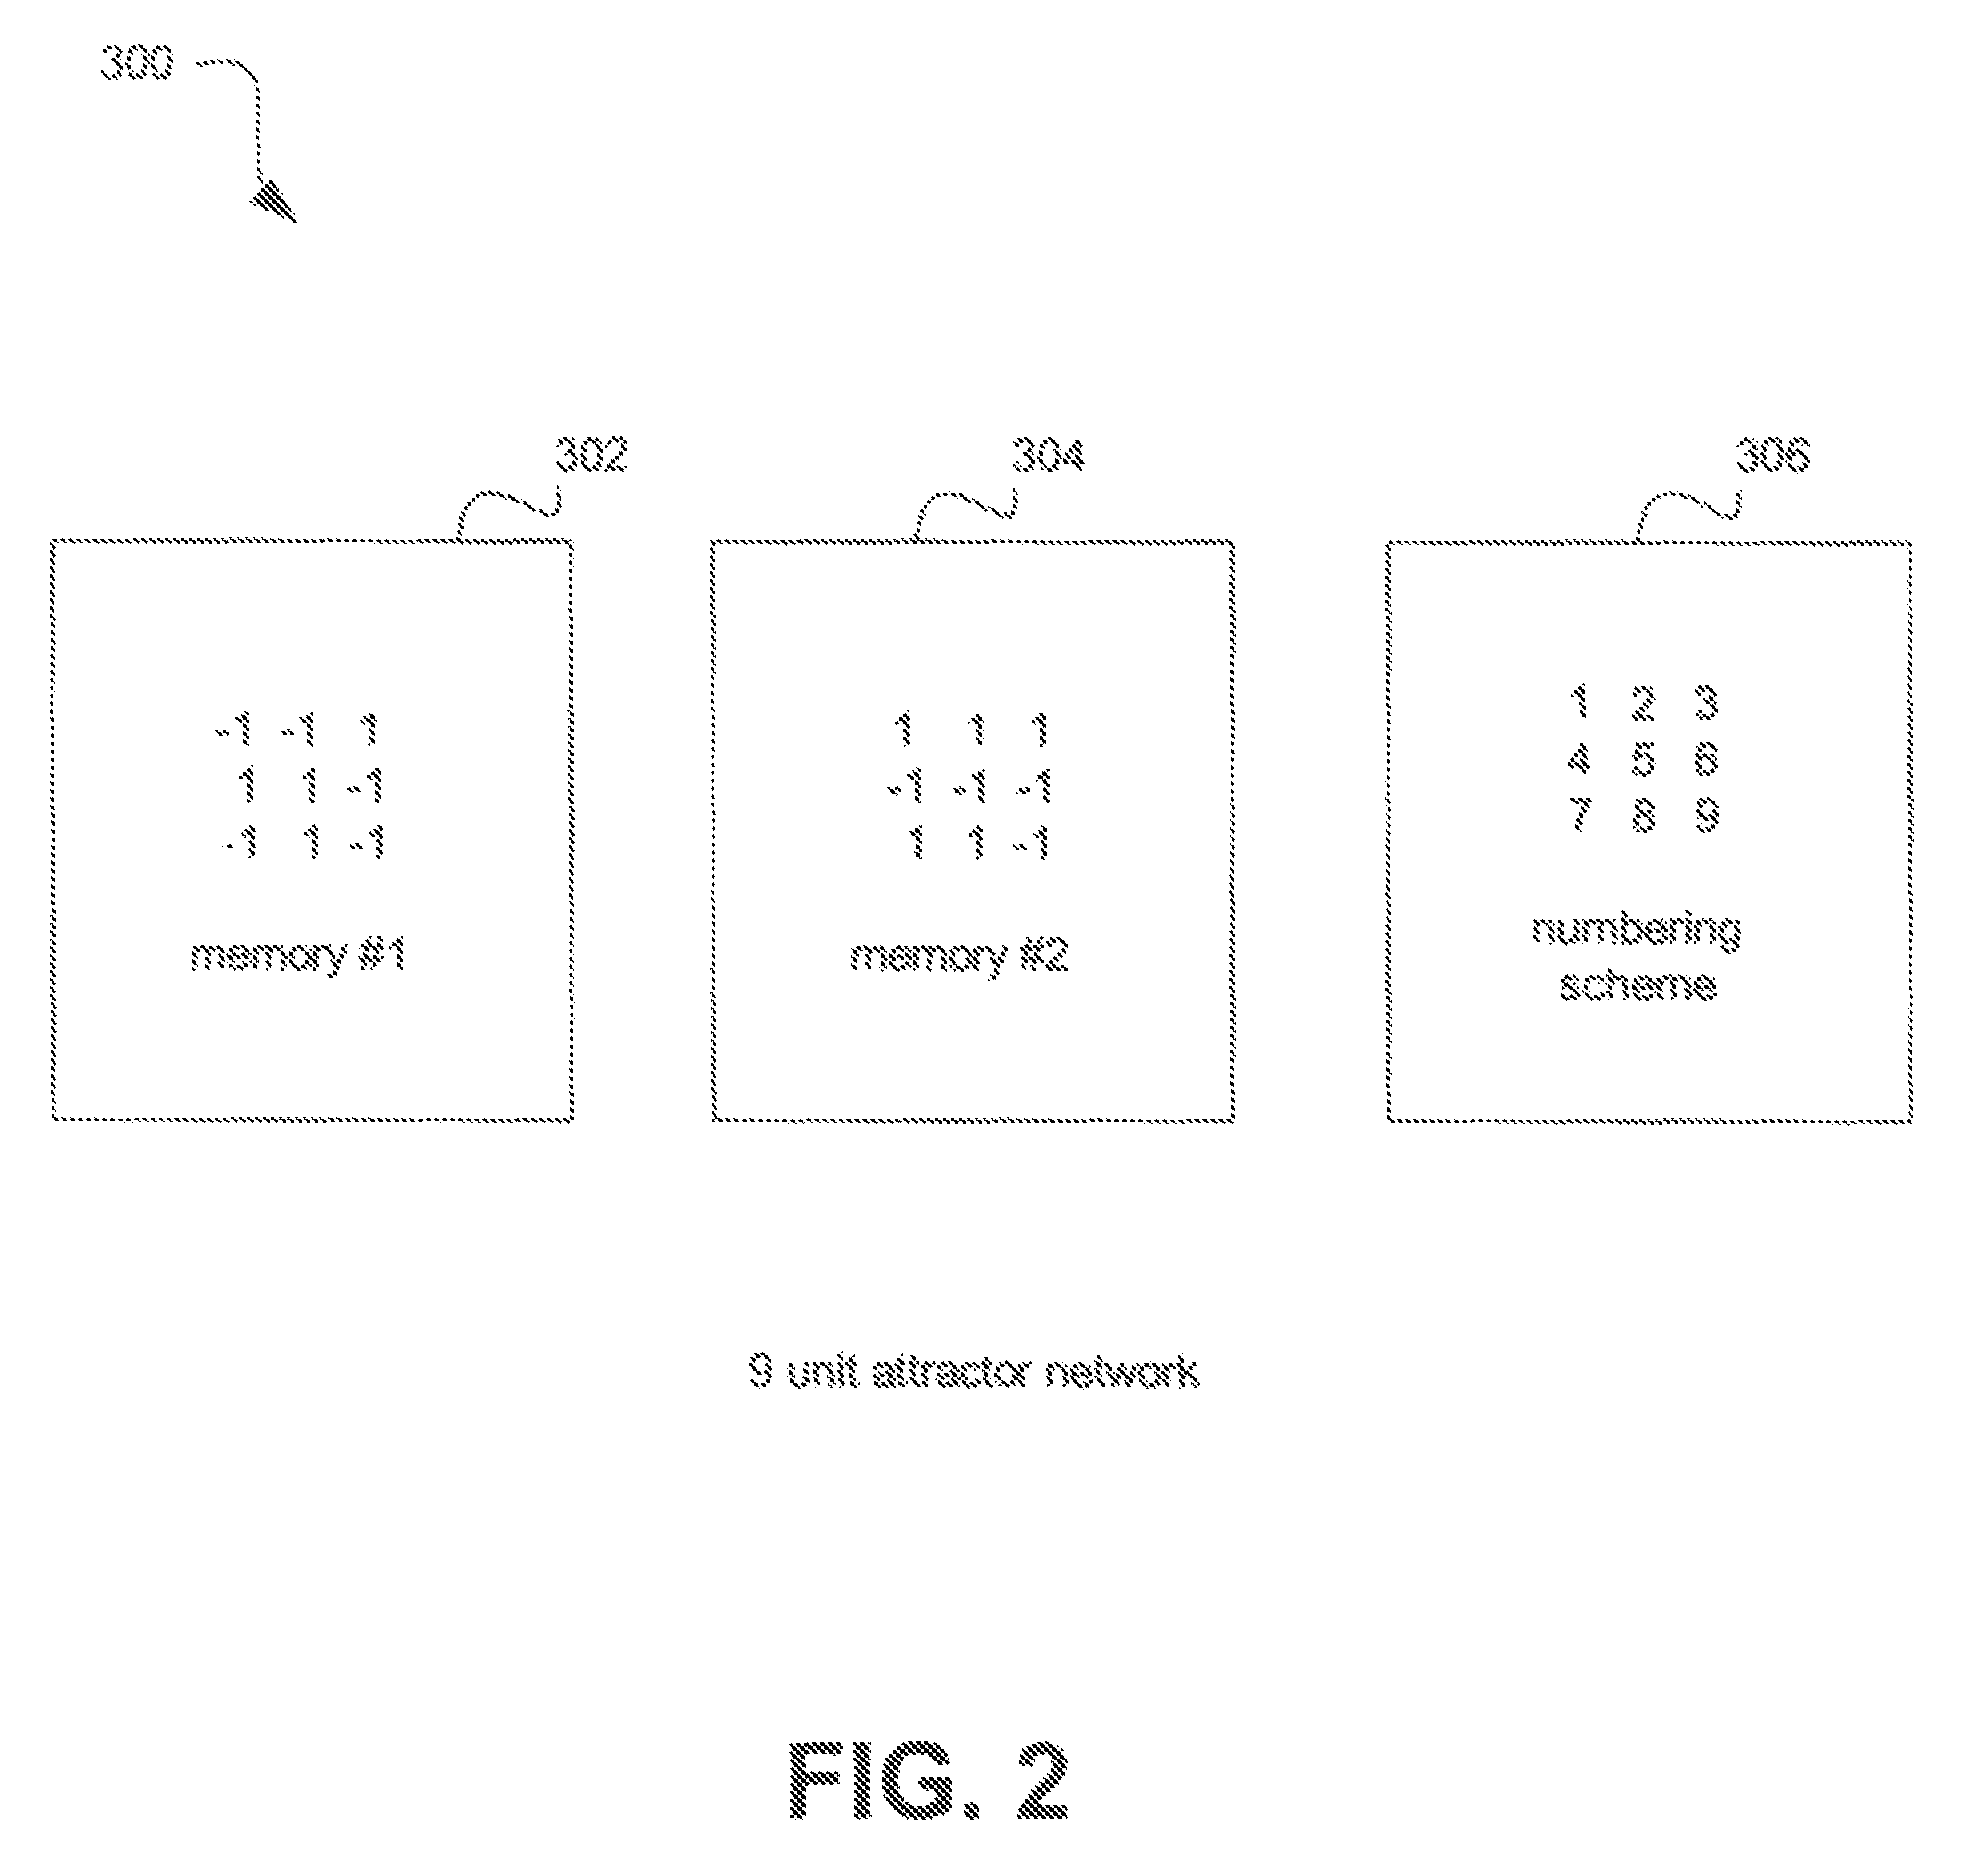 Methods and systems for drug screening and computational modeling based on biologically realistic neurons